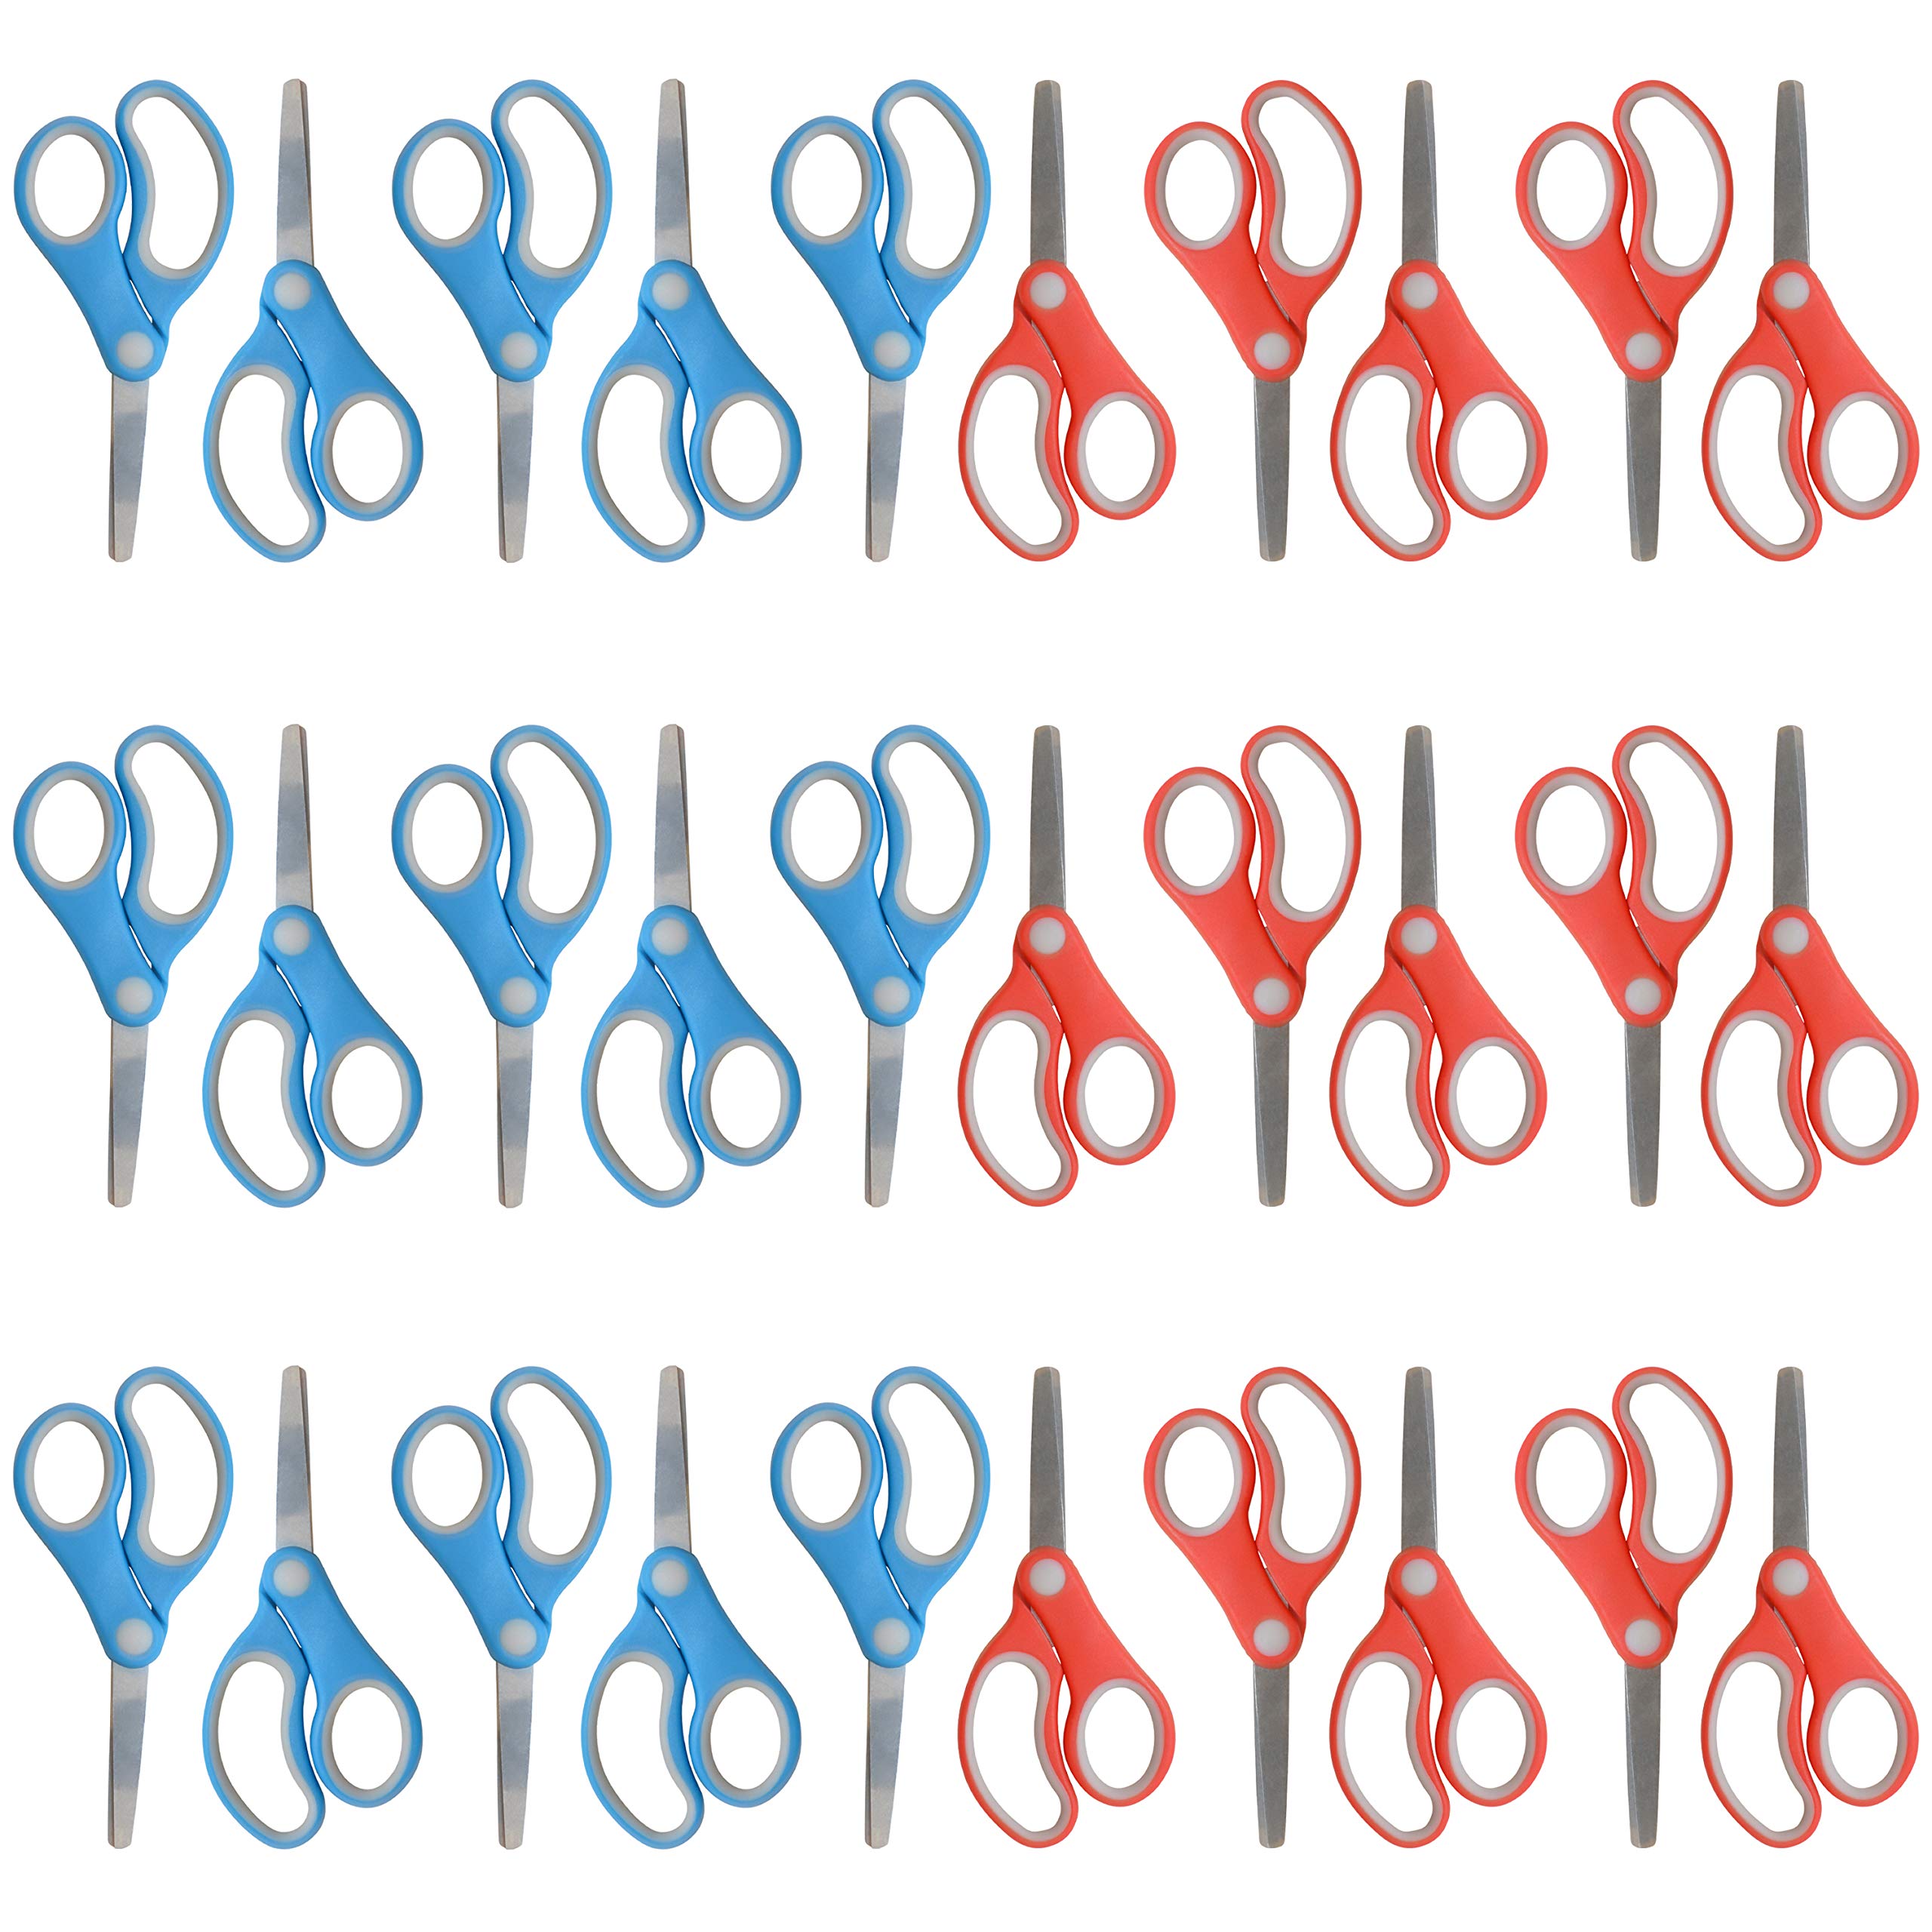 30-Pack 5" Westcott Right- and Left-Handed Blunt Tip Kids' Scissors $13.25 ($0.44 each) + Free Shipping w/ Prime or on $25+